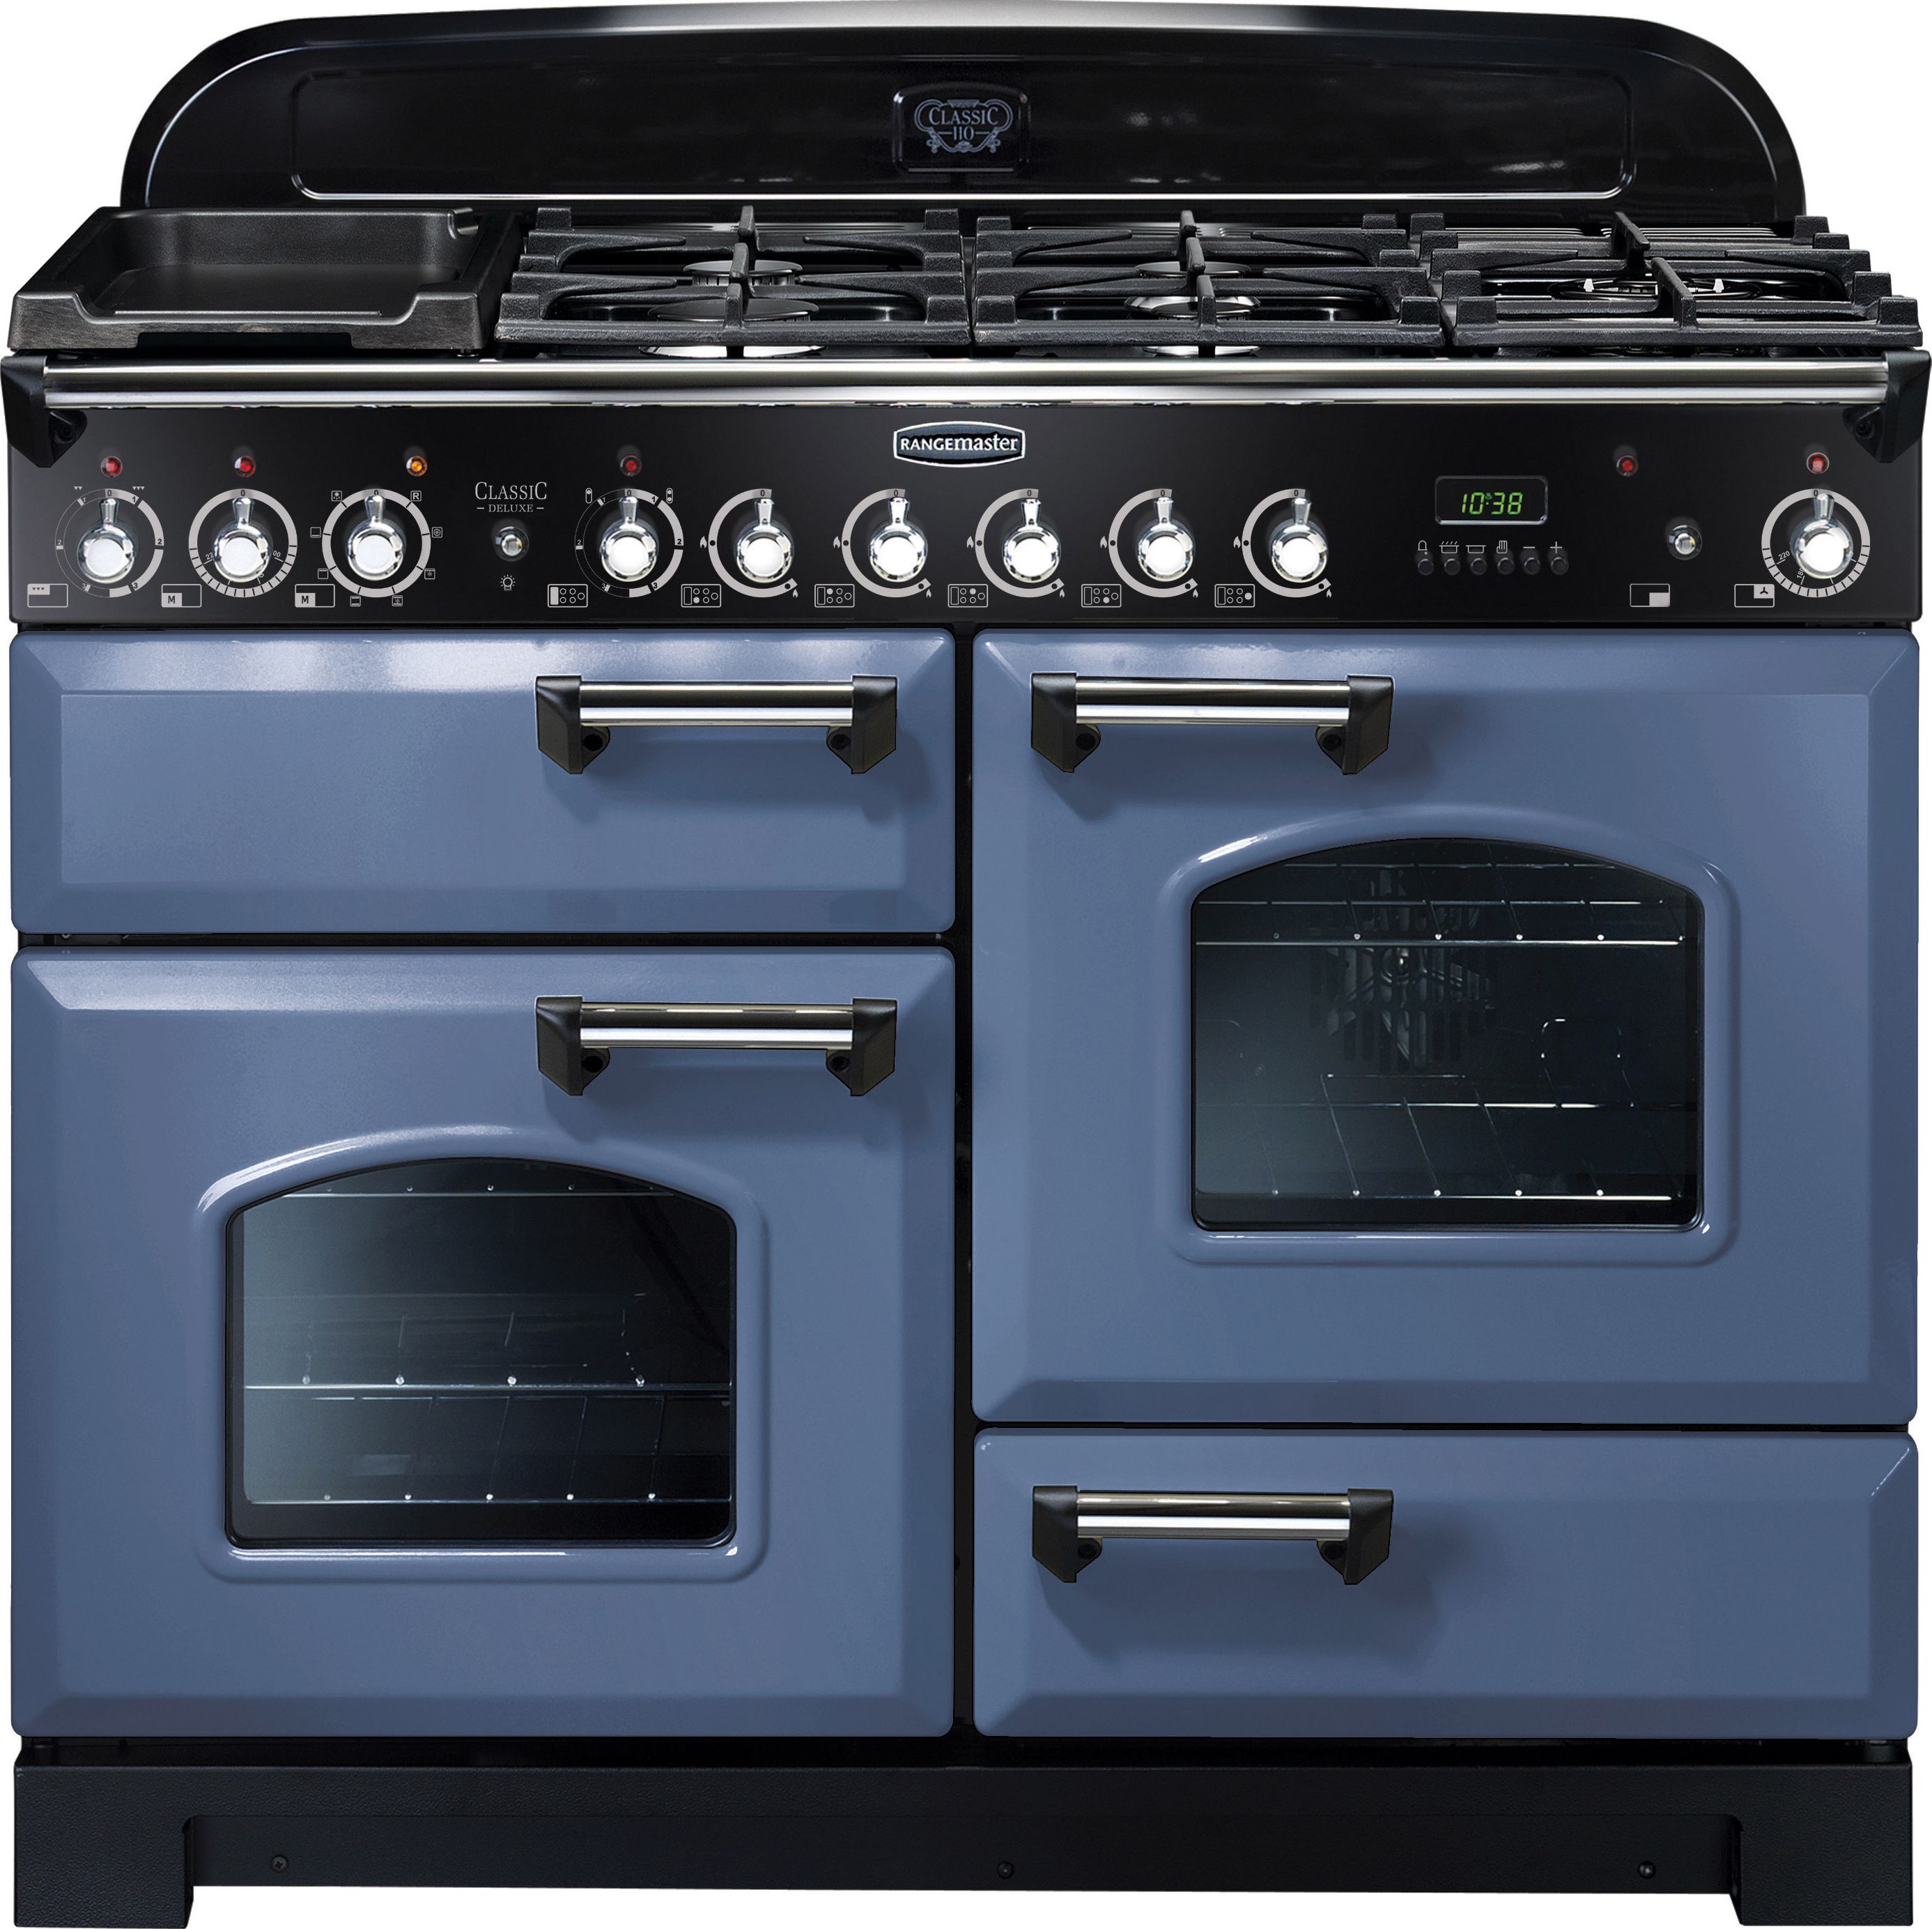 Rangemaster Classic Deluxe CDL110DFFSB/C 110cm Dual Fuel Range Cooker - Stone Blue / Chrome - A/A Rated, Blue